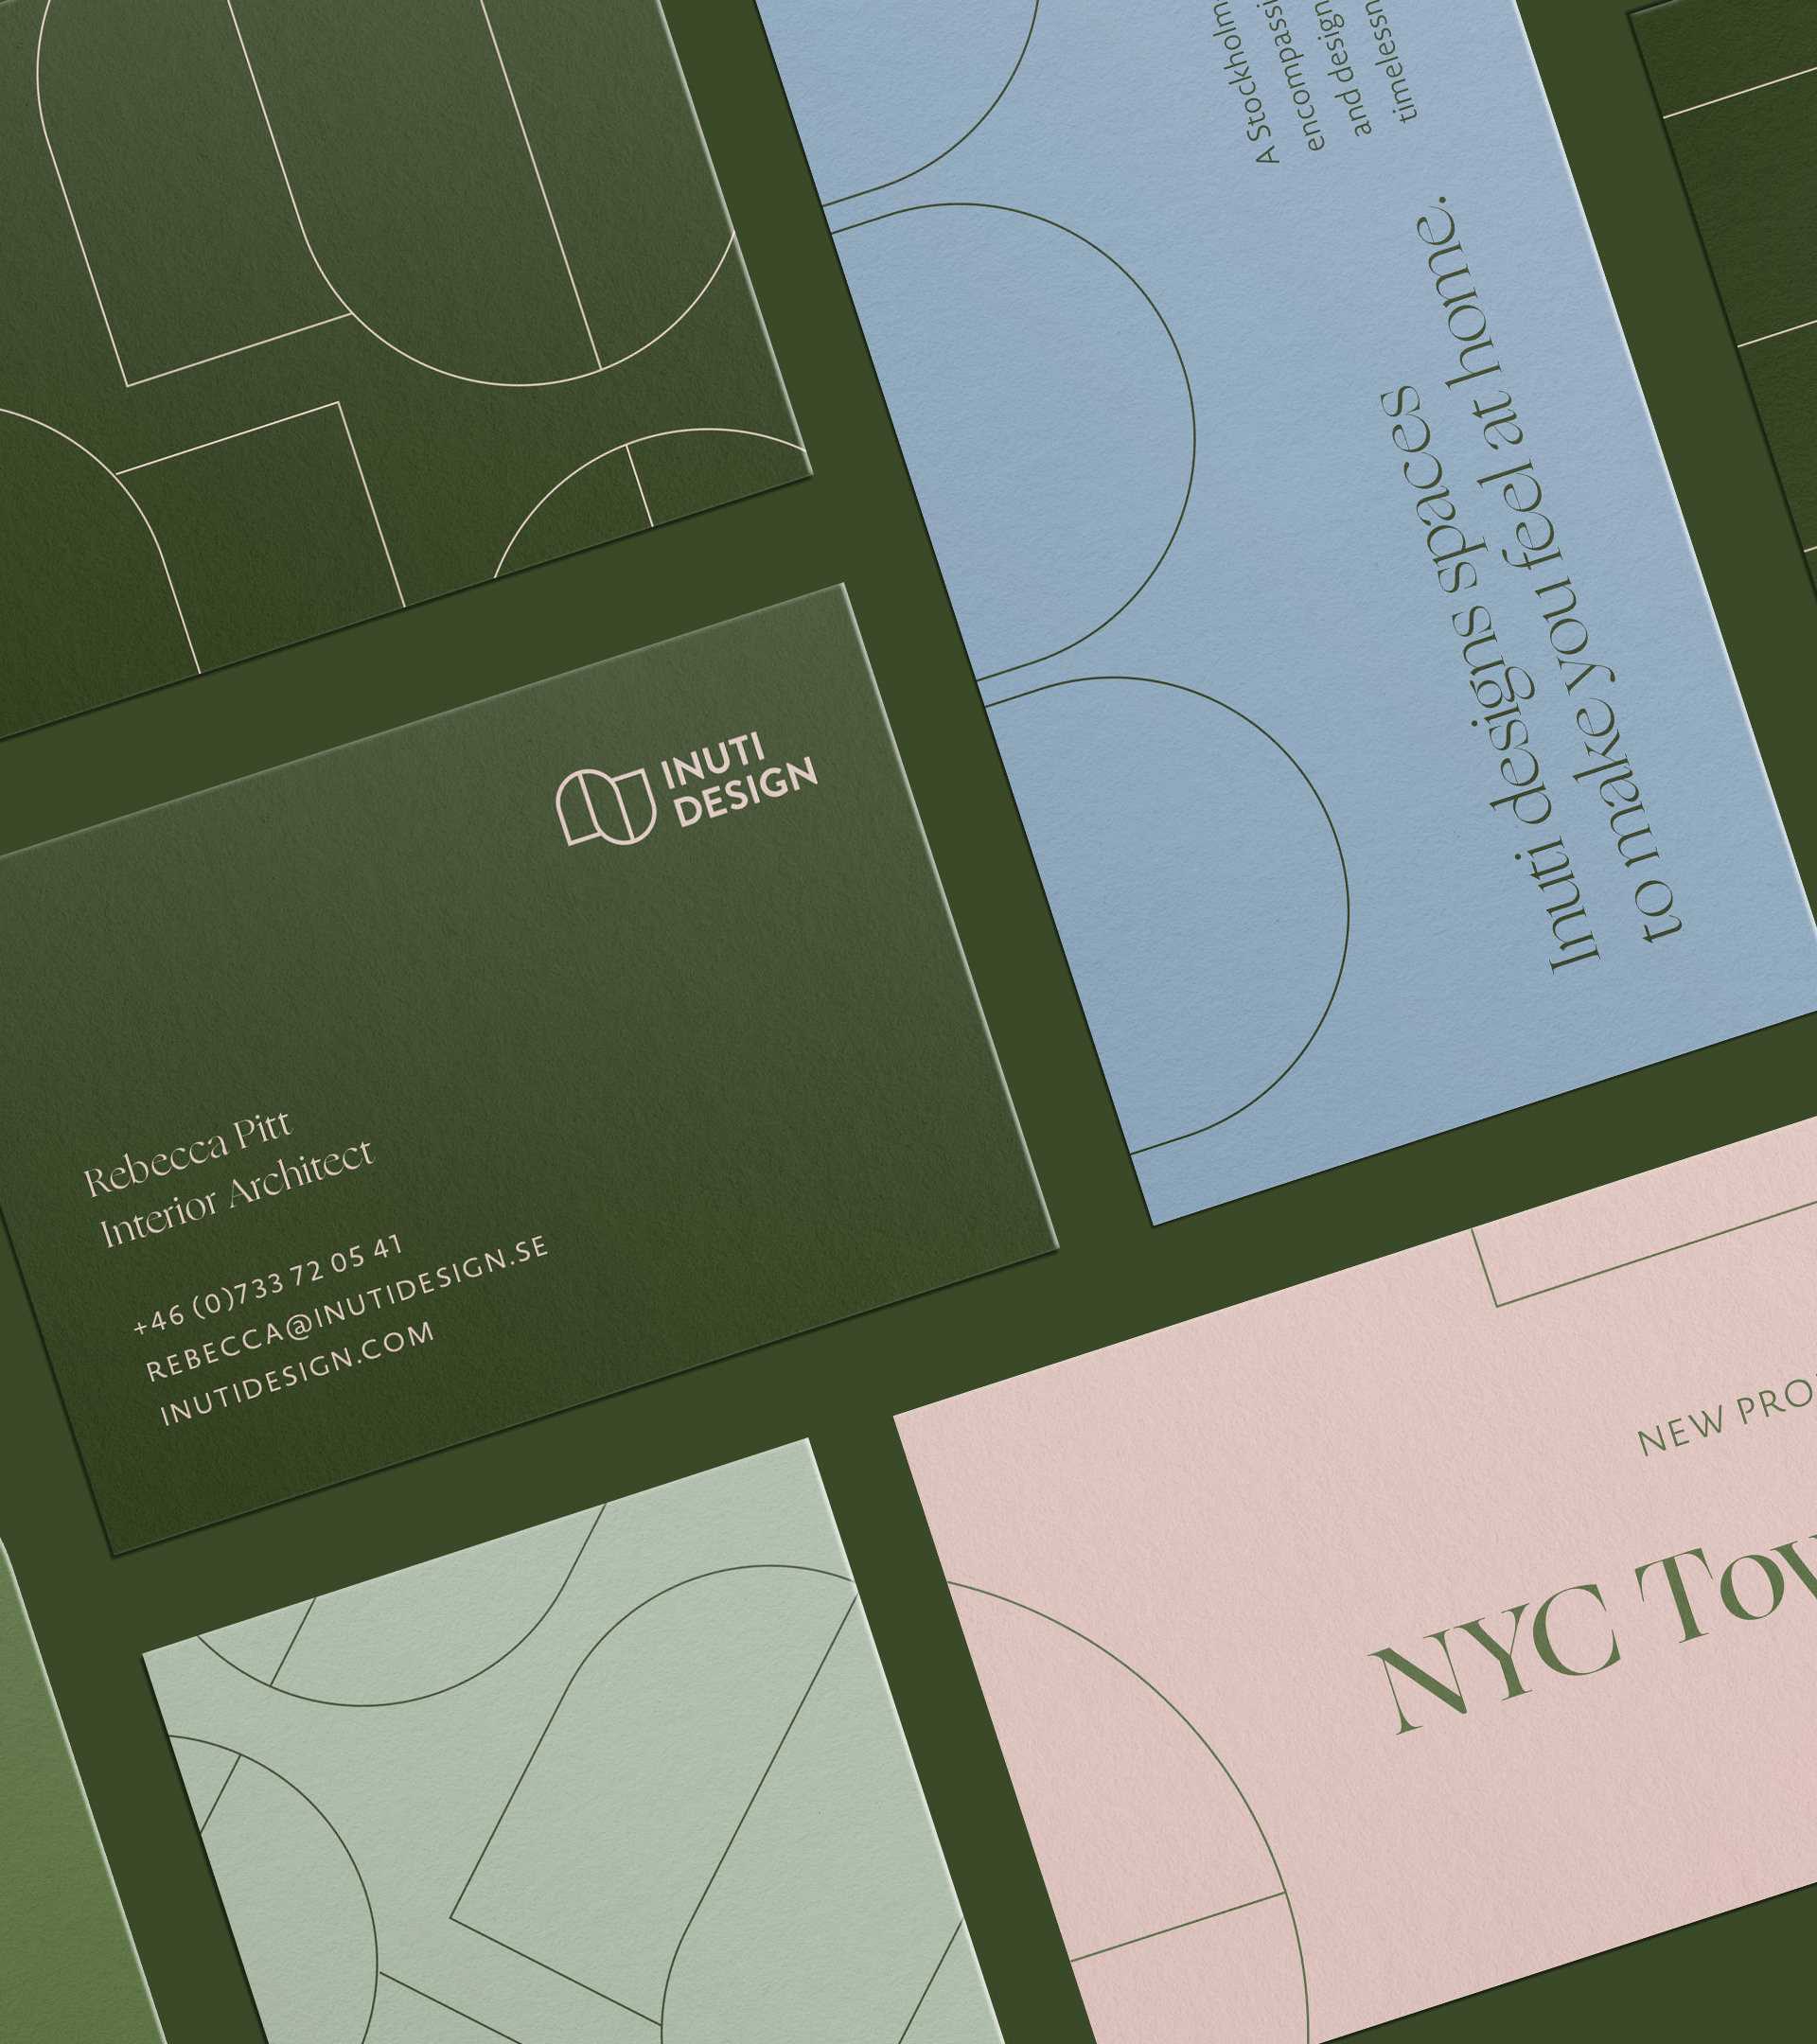 Stationaries for Inuti designed by Studio Poi